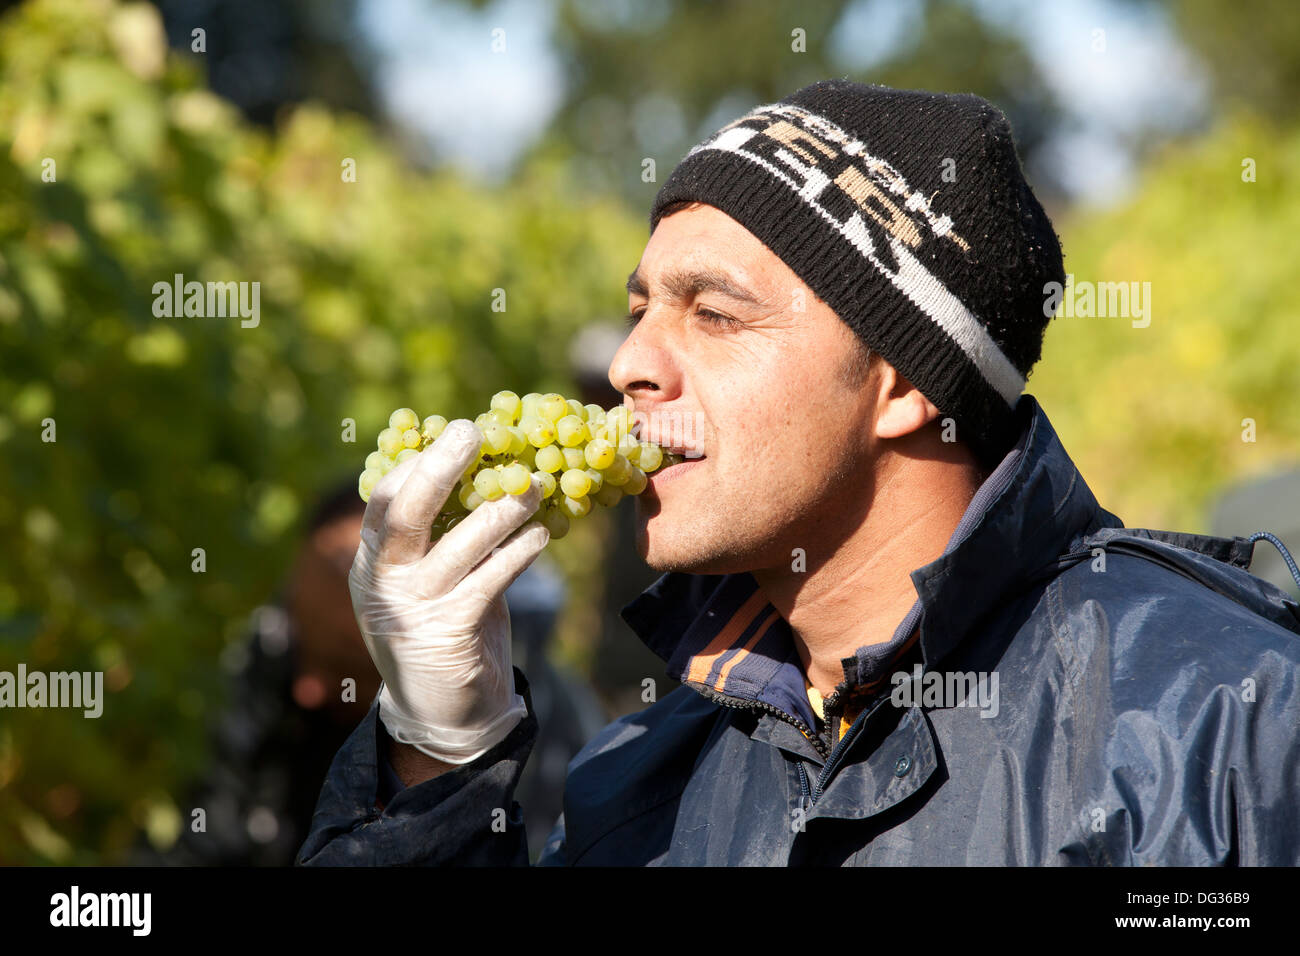 A Romanian grape picker tasting the grapes for ripeness, Chapel Down Wines, Tenterden, Kent, England, UK Stock Photo